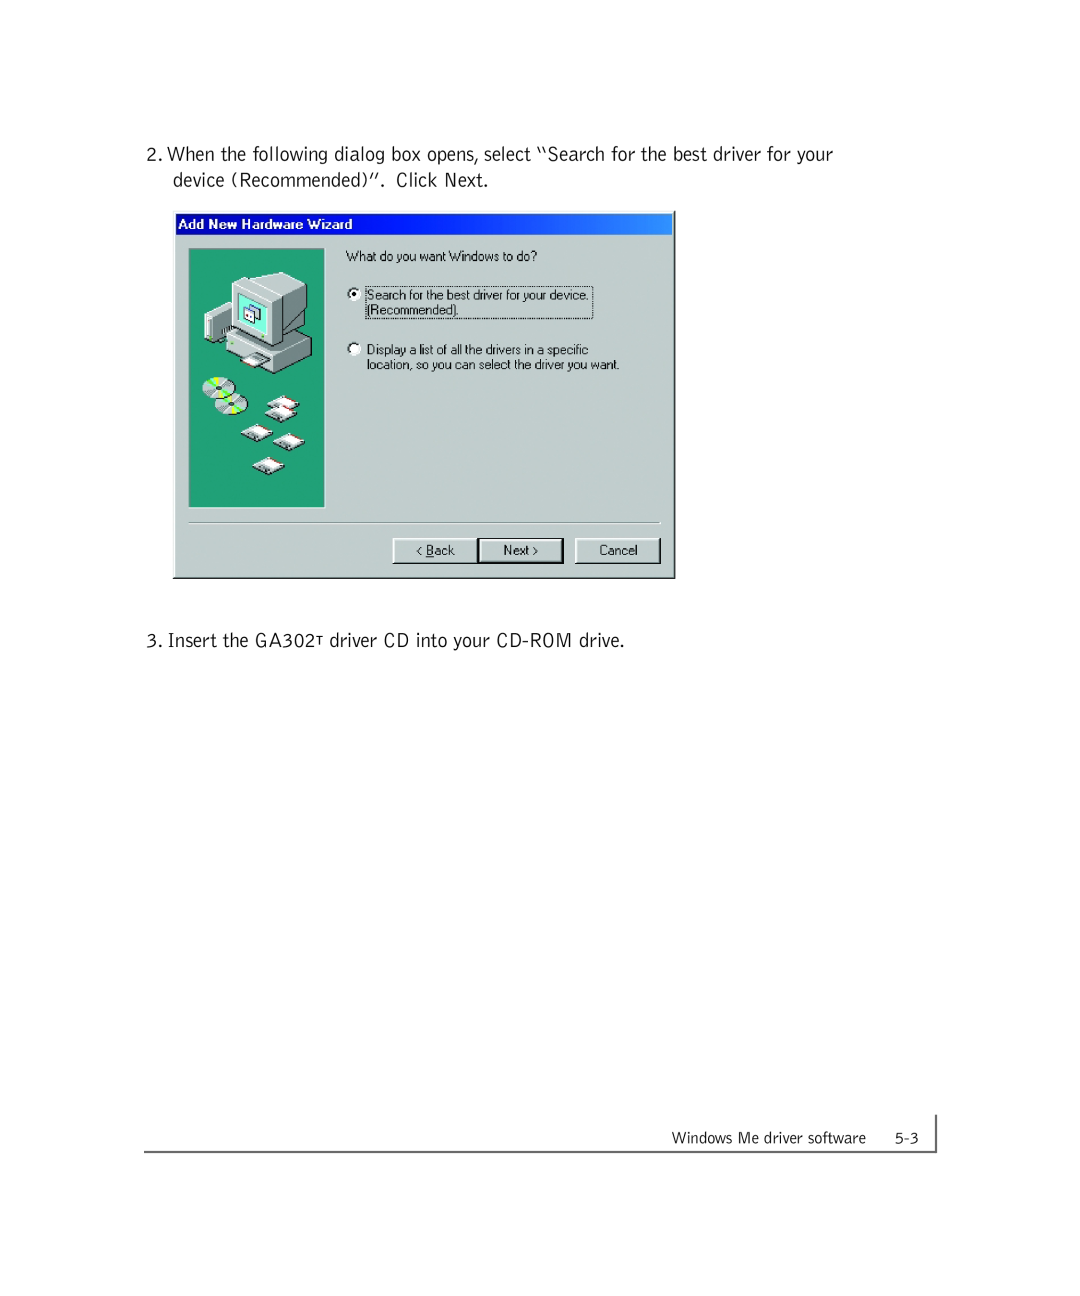 NETGEAR manual Insert the GA302T driver CD into your CD-ROM drive, Windows Me driver software 